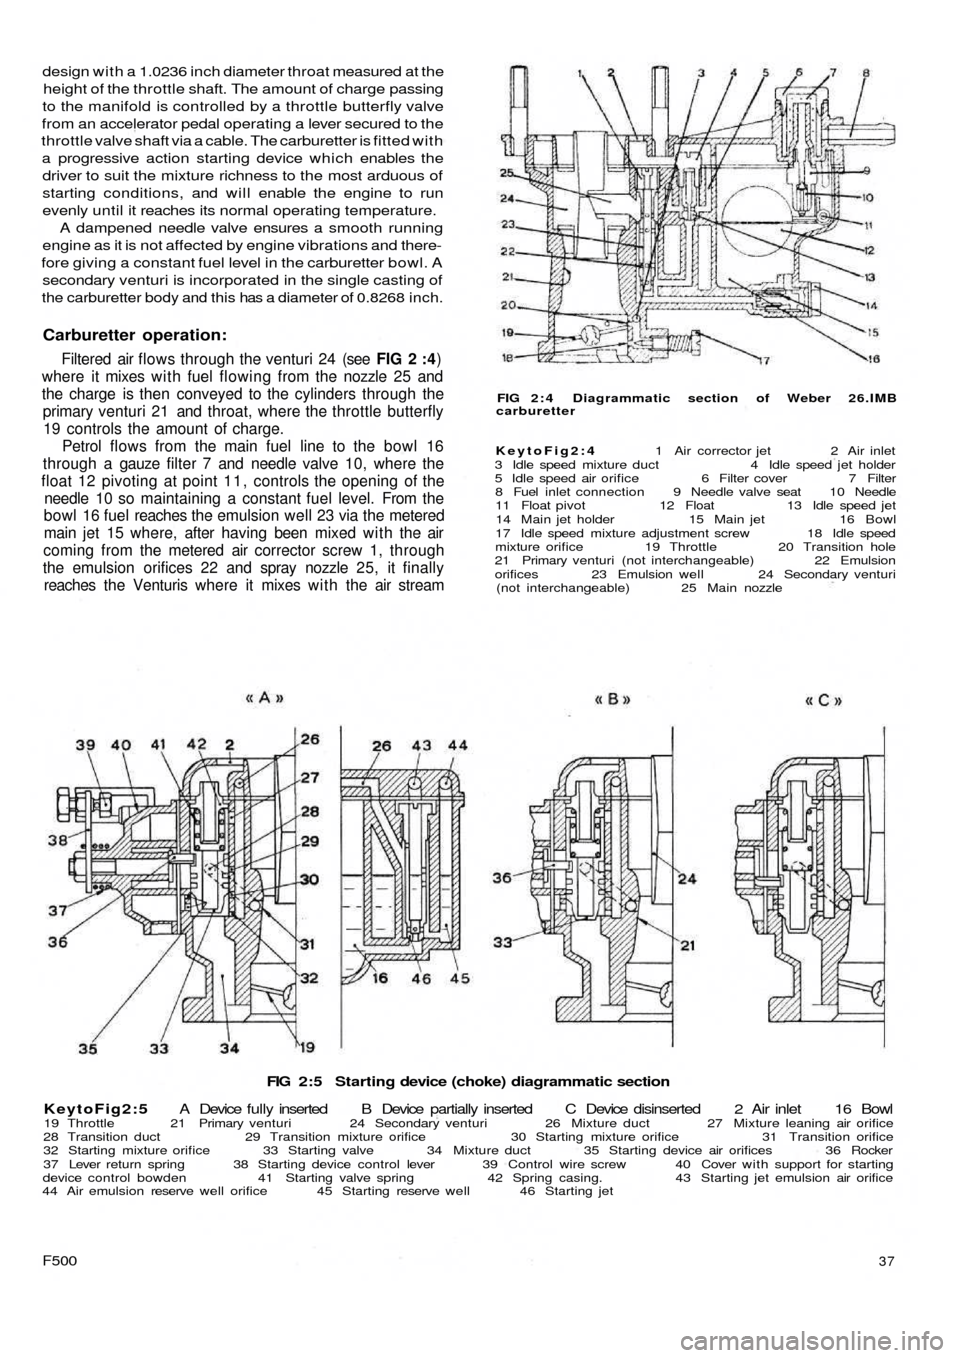 FIAT 500 1960 1.G Workshop Manual FIG 2:5  Starting device (choke) diagrammatic section
KeytoFig2:5 A  Device  fully inserted  B  Device  partially  inserted  C  Device  disinserted  2  Air  inlet 16 Bowl
19 Throttle  21 Primary ventu